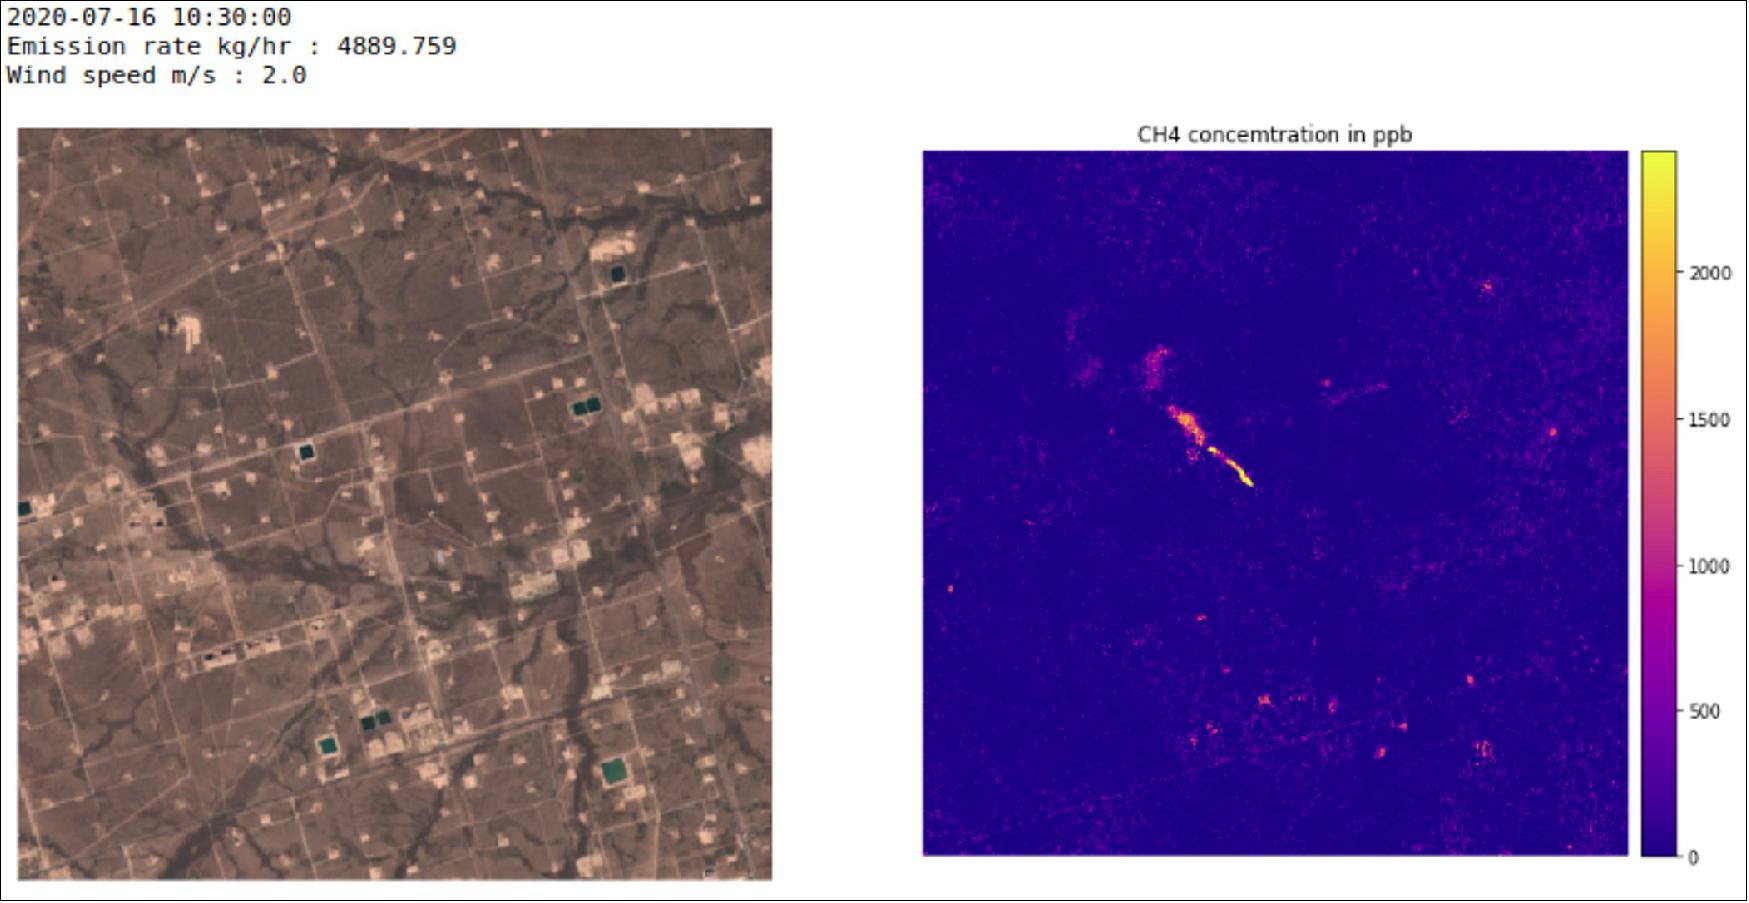 Figure 42: Methane hotspot detected with Copernicus Sentinel-2 imagery. The image shows the methane hotspot detected with Copernicus Sentinel-2 imagery. The image of the location is displayed on the left, while the corresponding methane enhancement image can be seen on the right. This clearly shows the methane plumes over the area (image credit: ESA, the image contains modified Copernicus data (2020), processed by Kayrros)